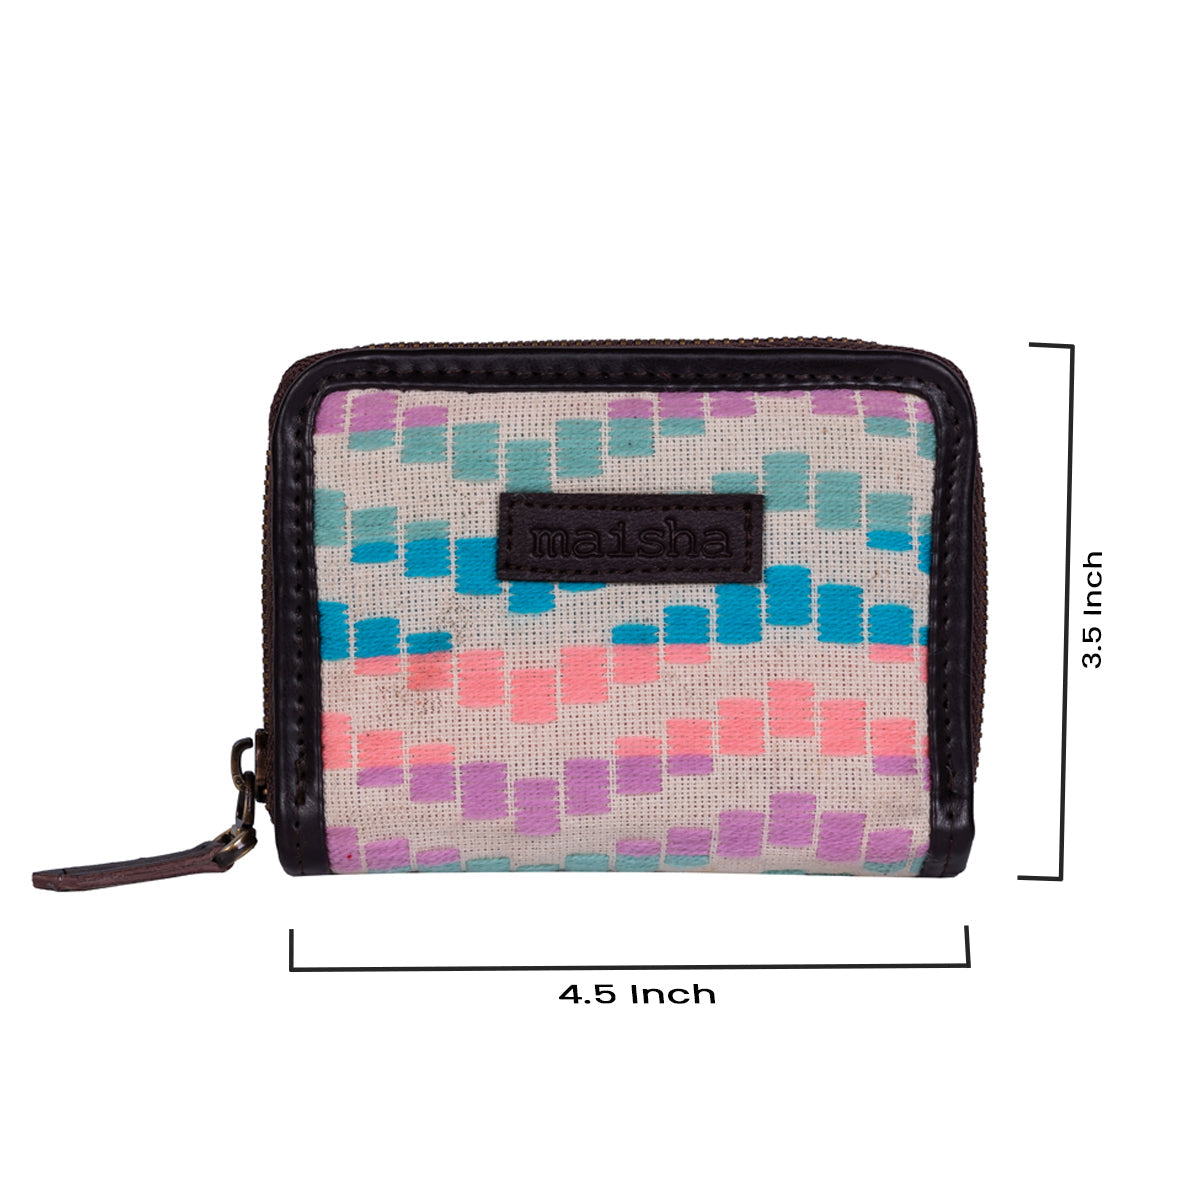 Pastel Poise Compact Wallet